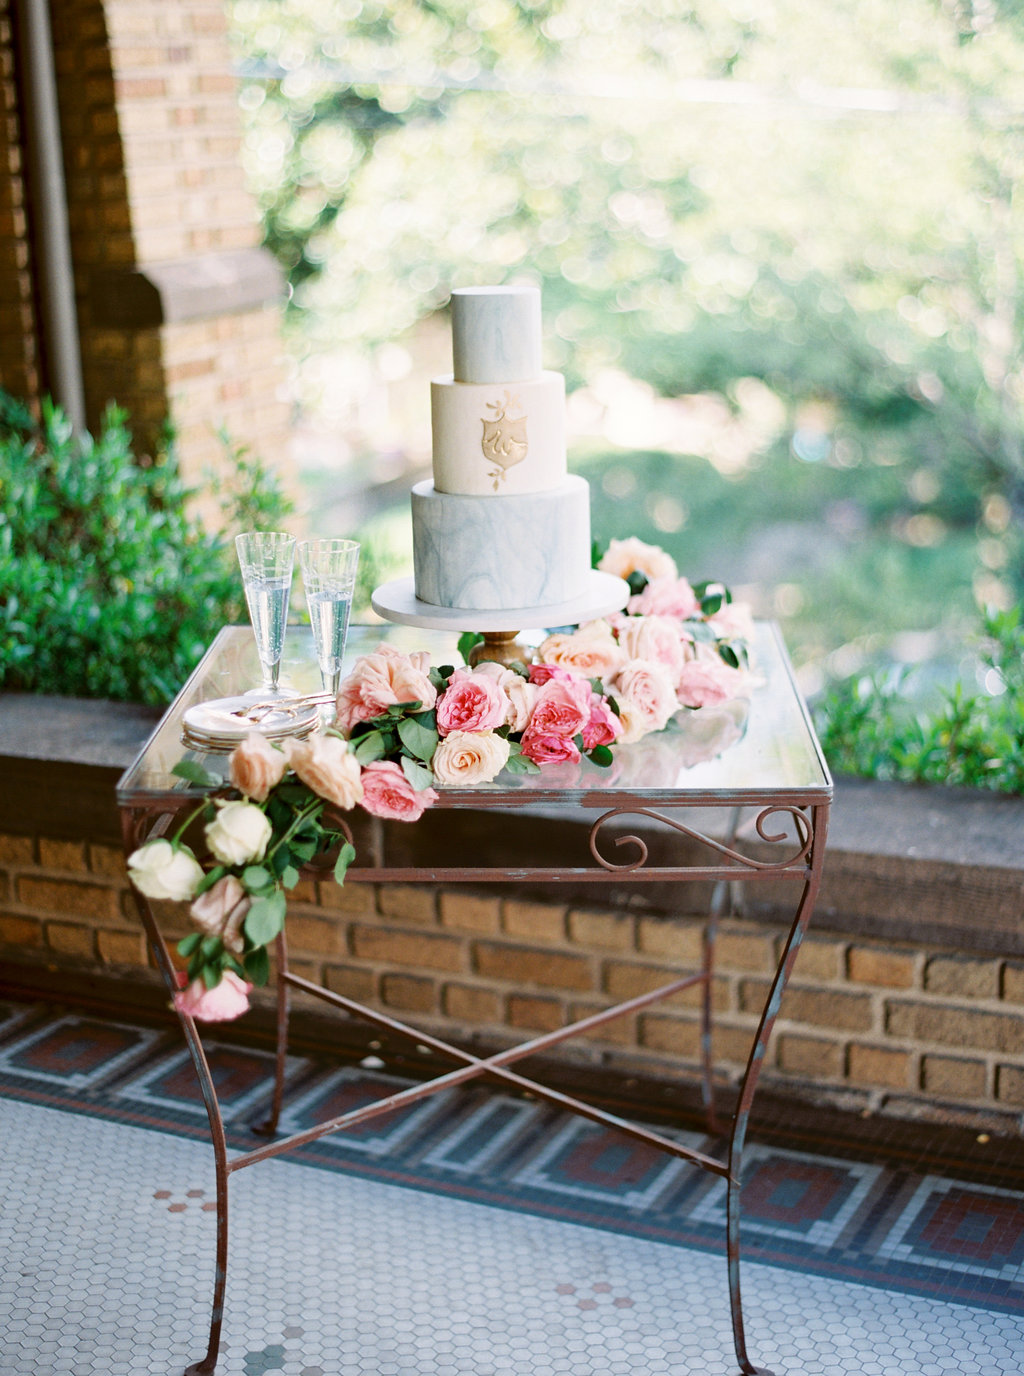 Cake Table with Blue and White Marble Wedding Cake